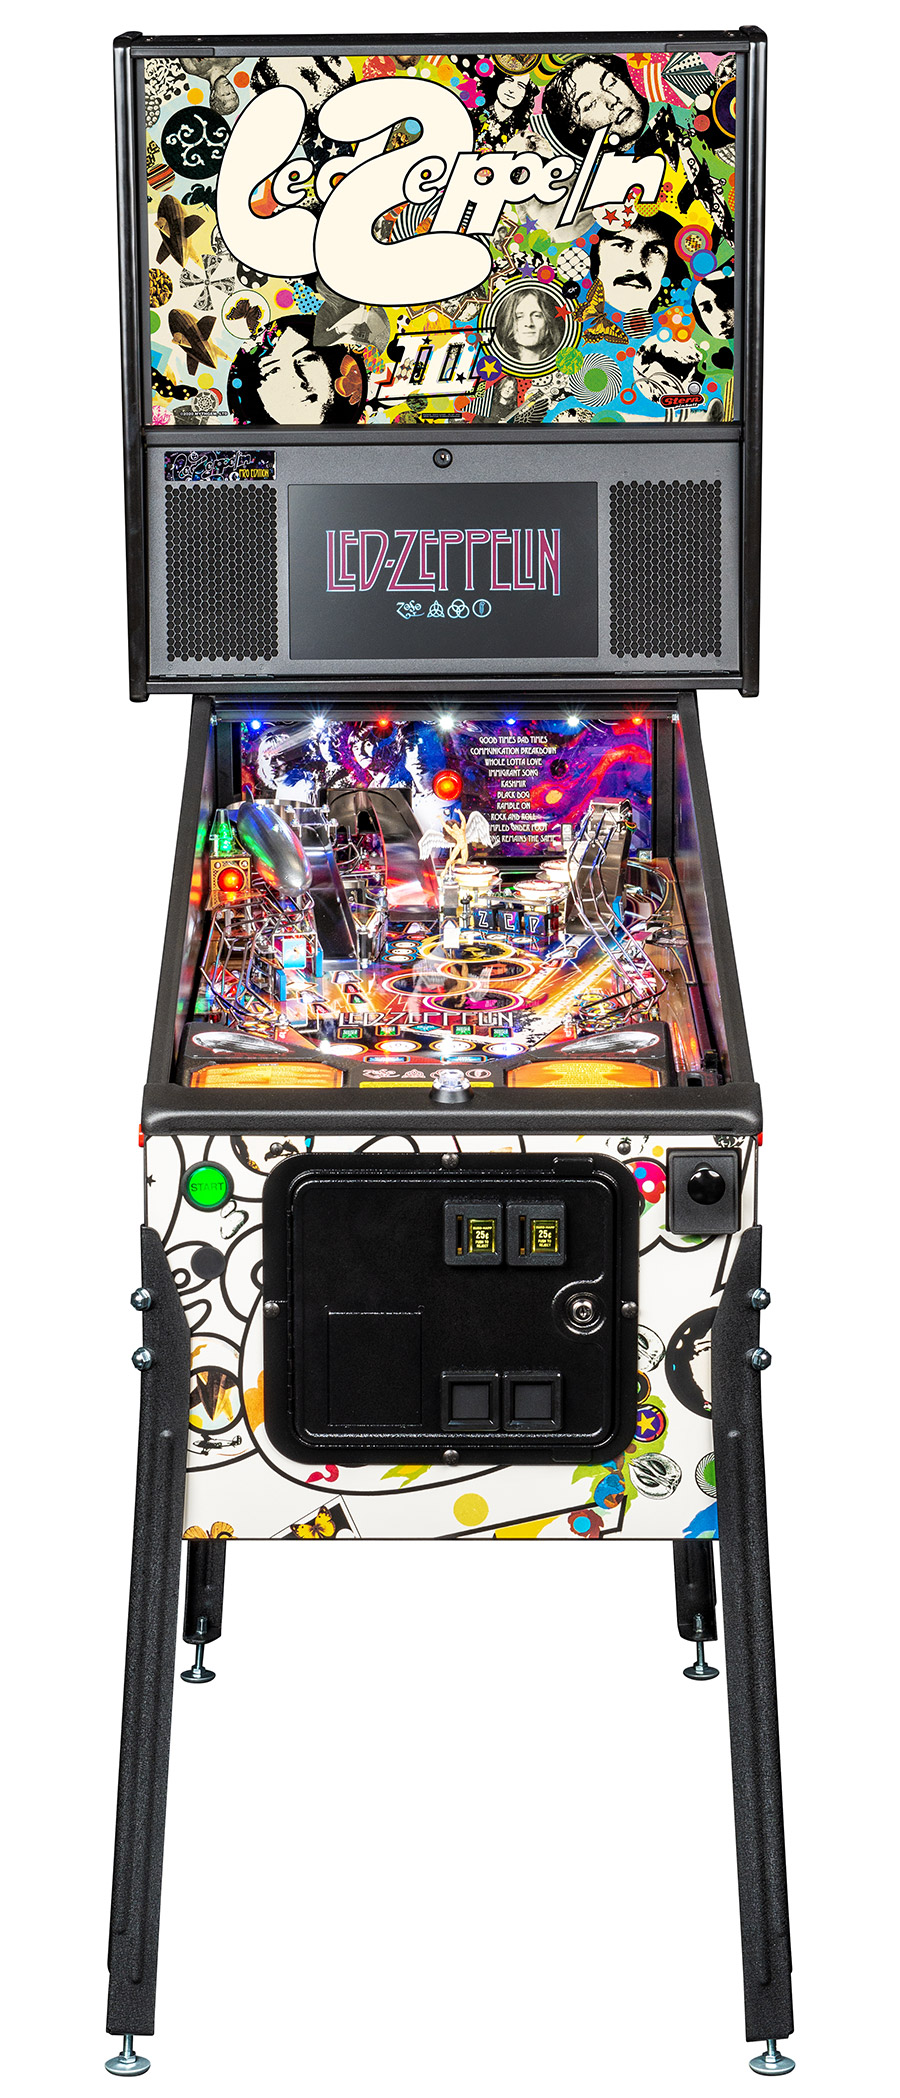 REVEALS LED ZEPPELIN PINBALL – Welcome to Pinball First & Free